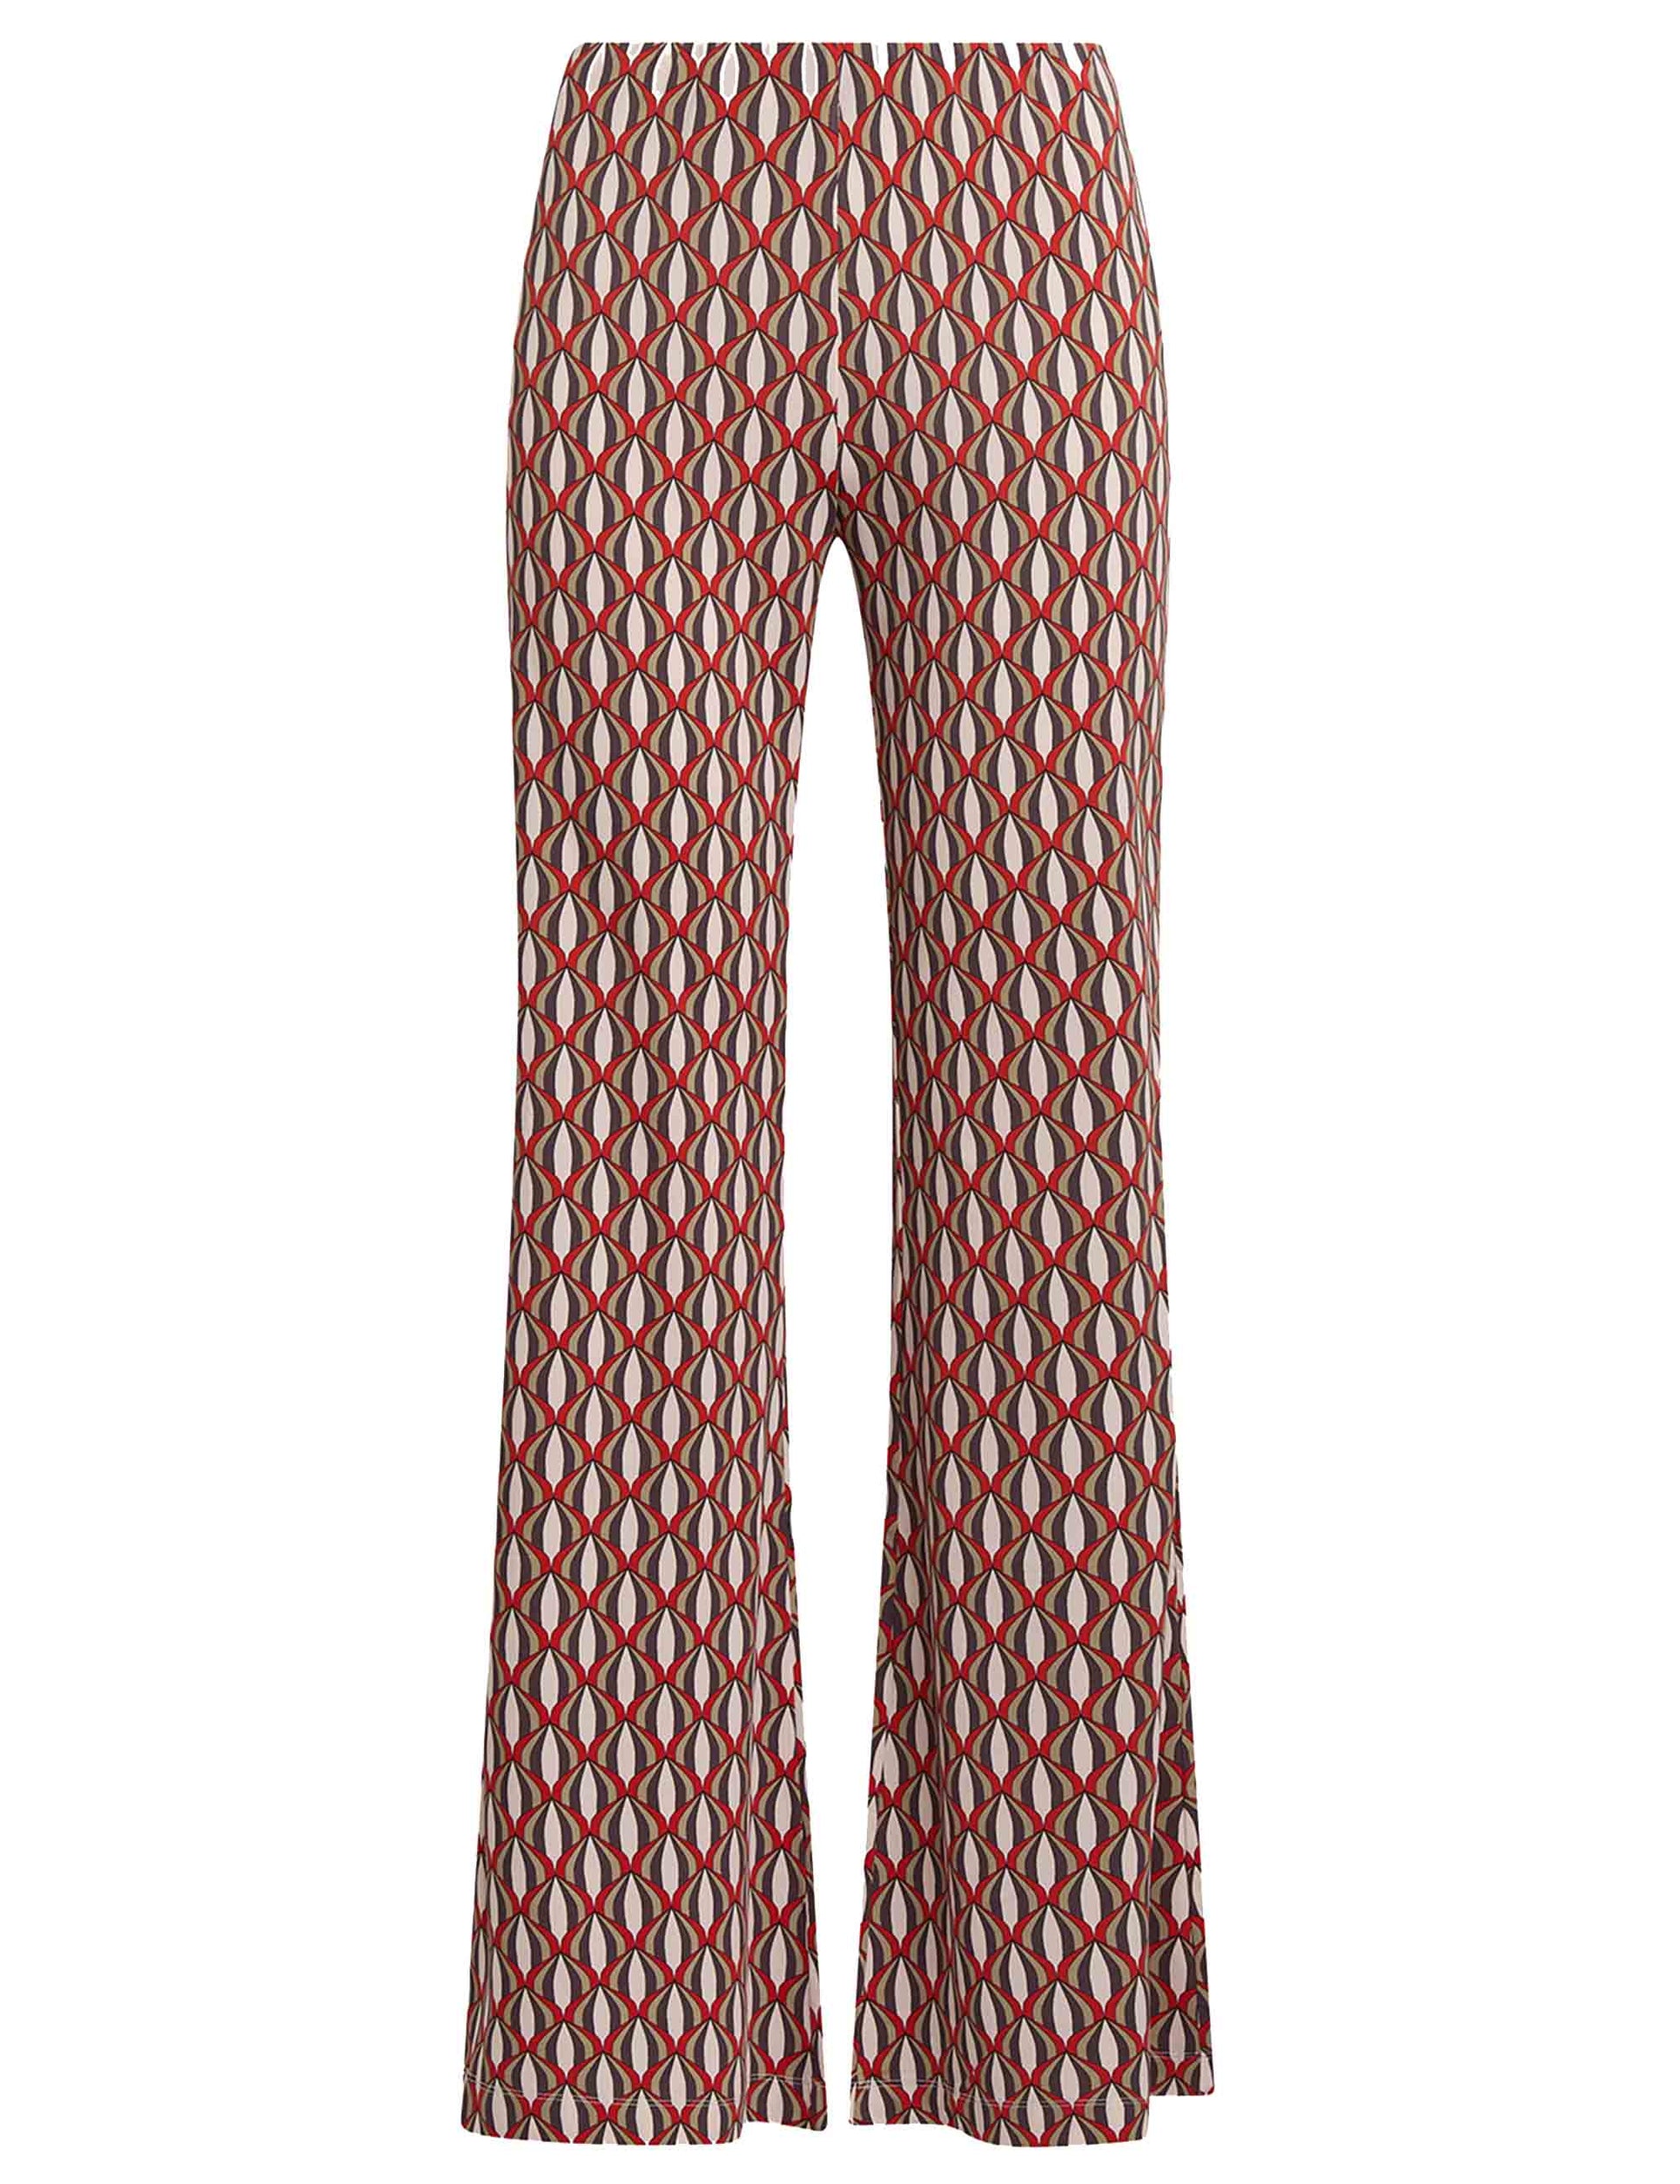 Lucky Balloon women's trousers in patterned brown jersey